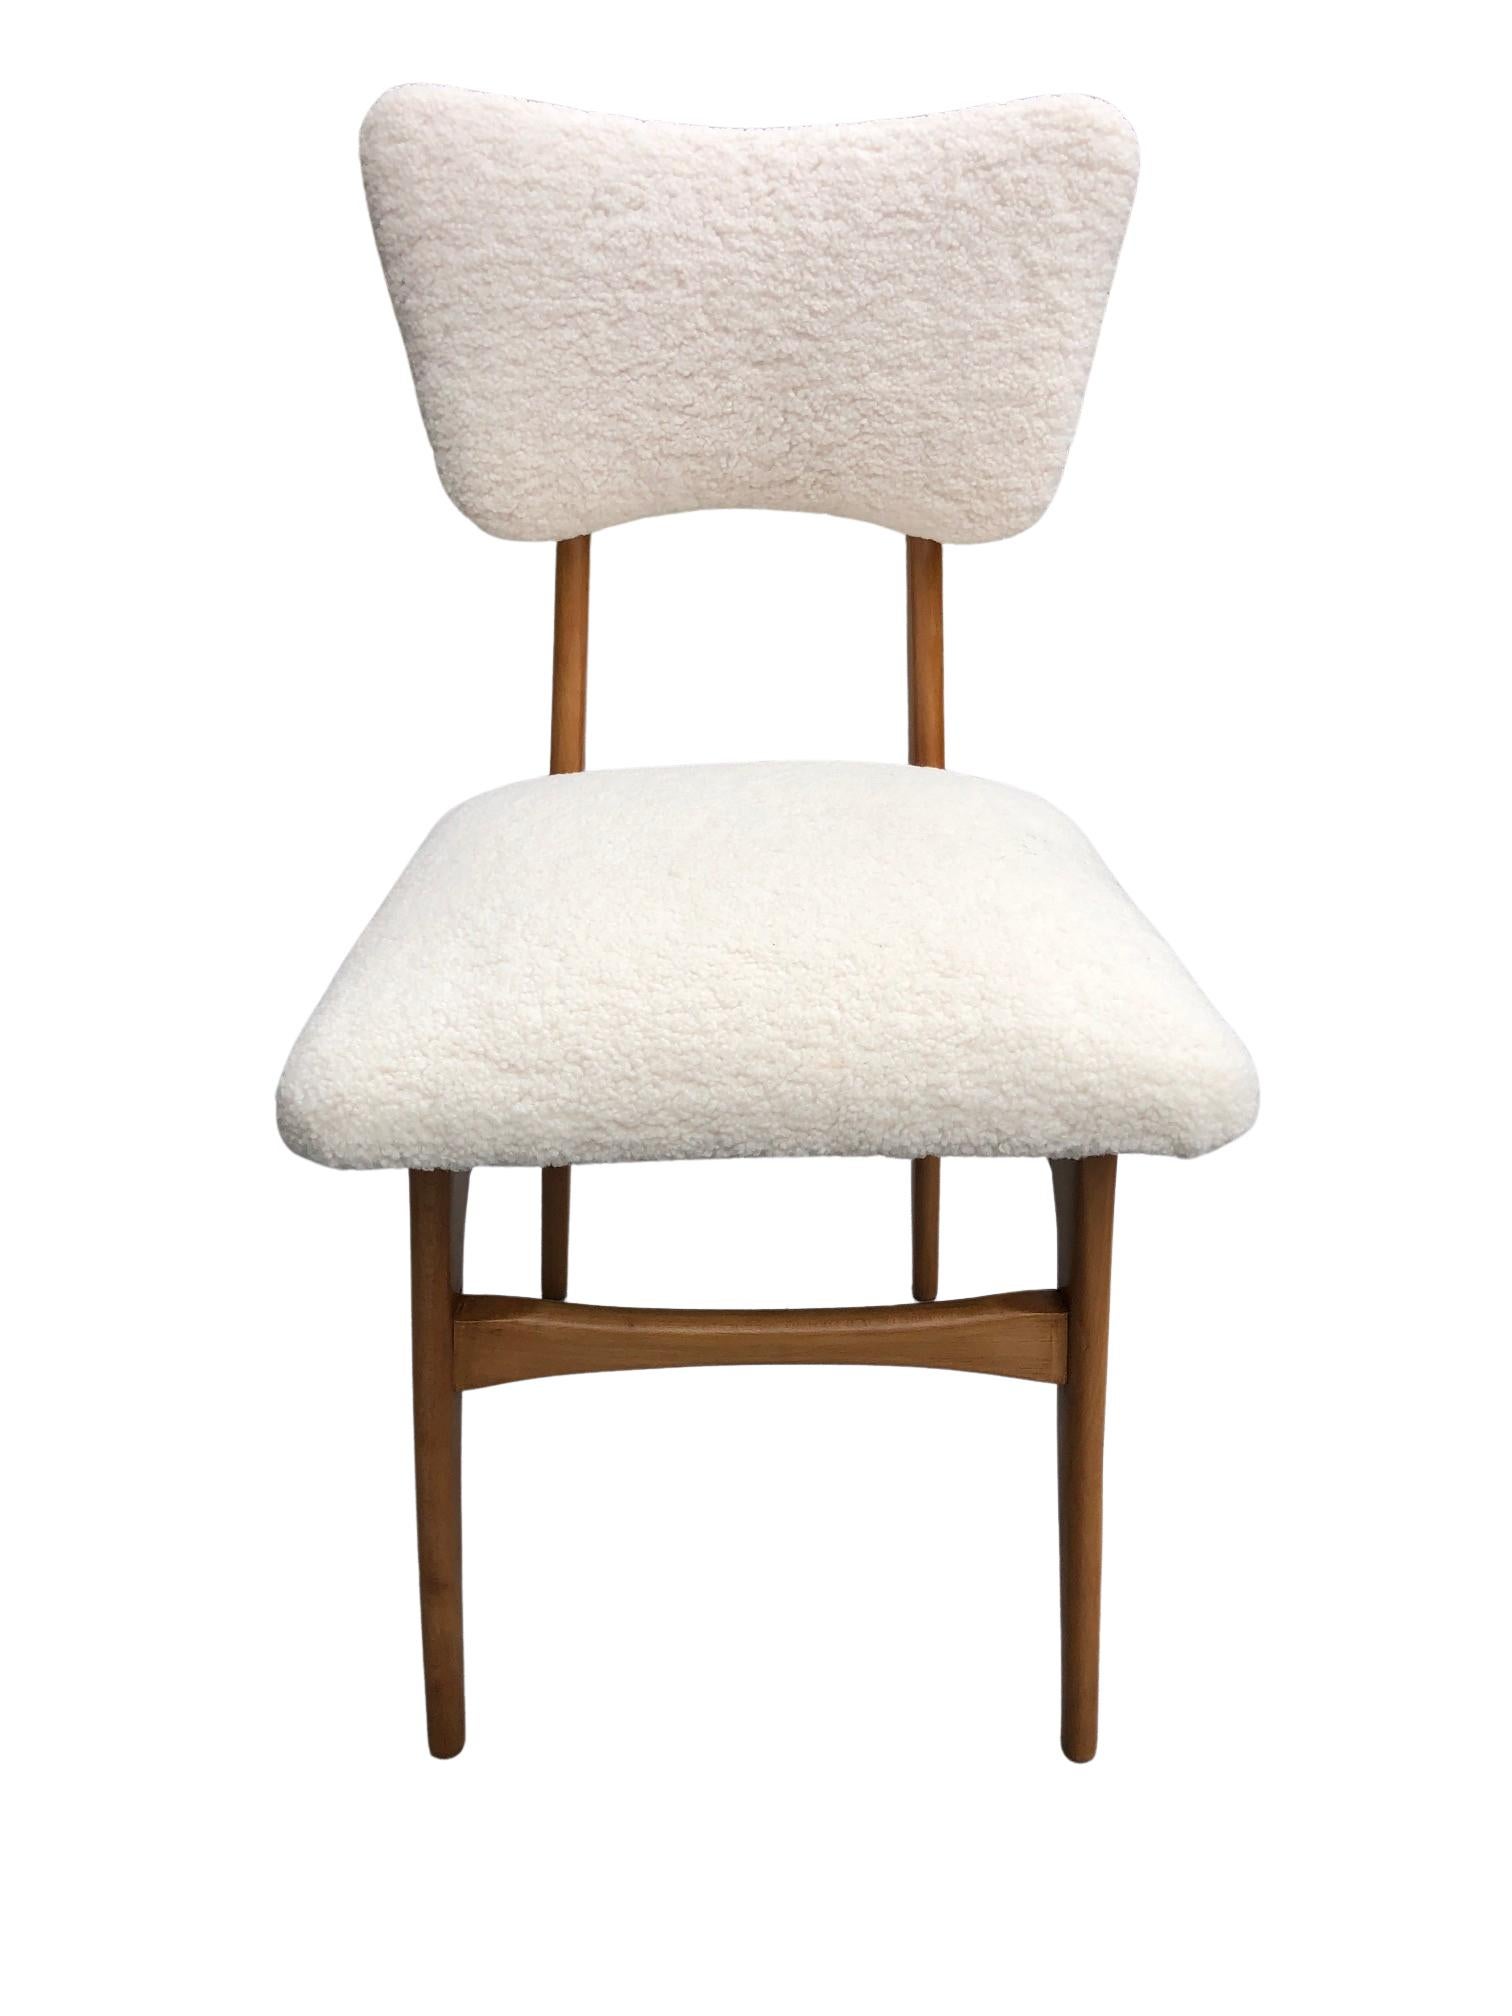 Unique chairs manufactured in Poland in the 1960s, designed by Rajmund Halas. 

The upholstery is made of pleasant to touch bouclé textile. It is high quality and durable italian fabric in a light cream color. The chair structure is made of